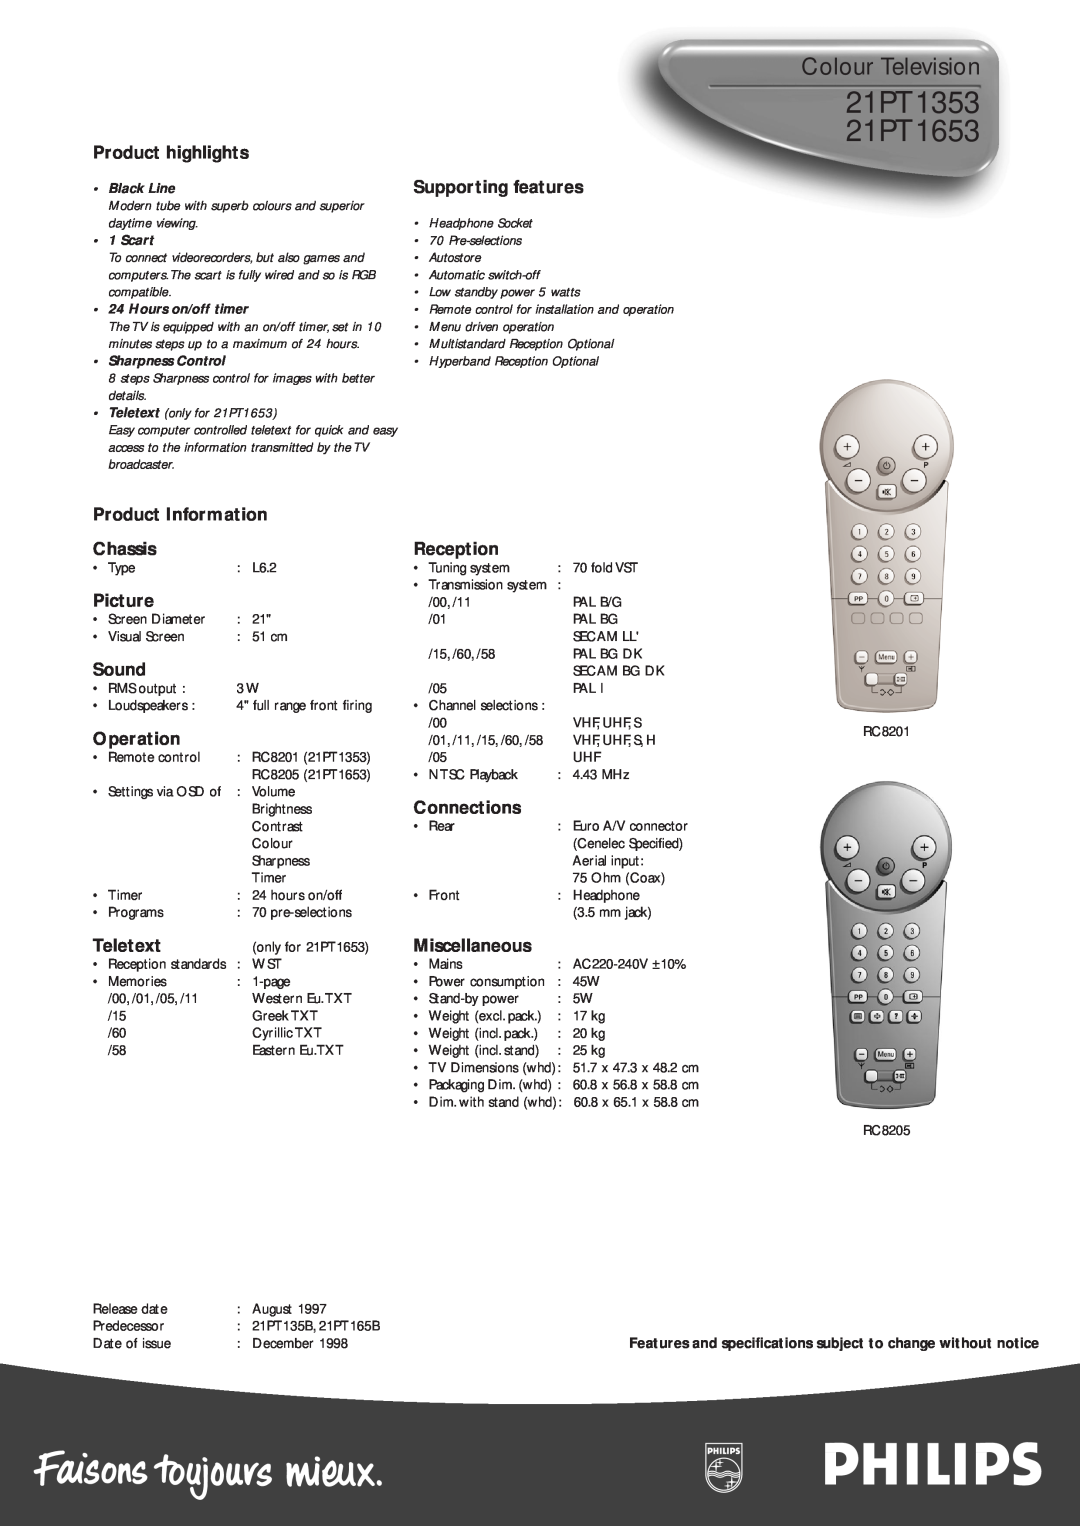 Philips 21PT1353 21PT1653, Colour Television, Product highlights, Supporting features, Product Information, Chassis 